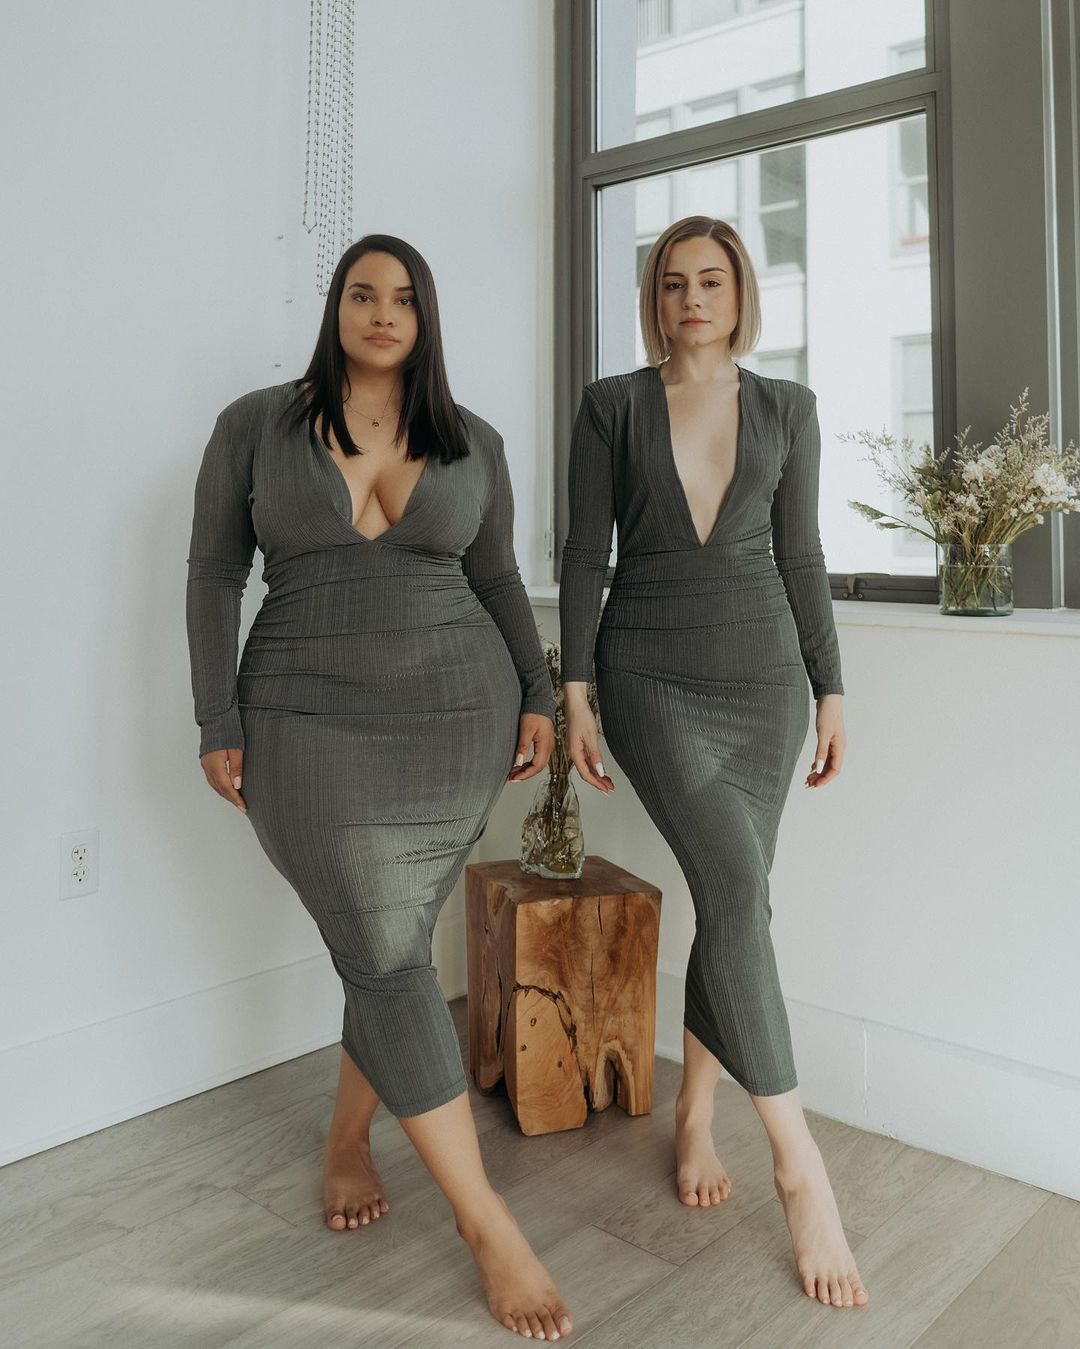 Body Positive Denis Mercedes and Maria Castellanos |  Dress to impress: Two friends show that style shines on every body |  Herbeauty